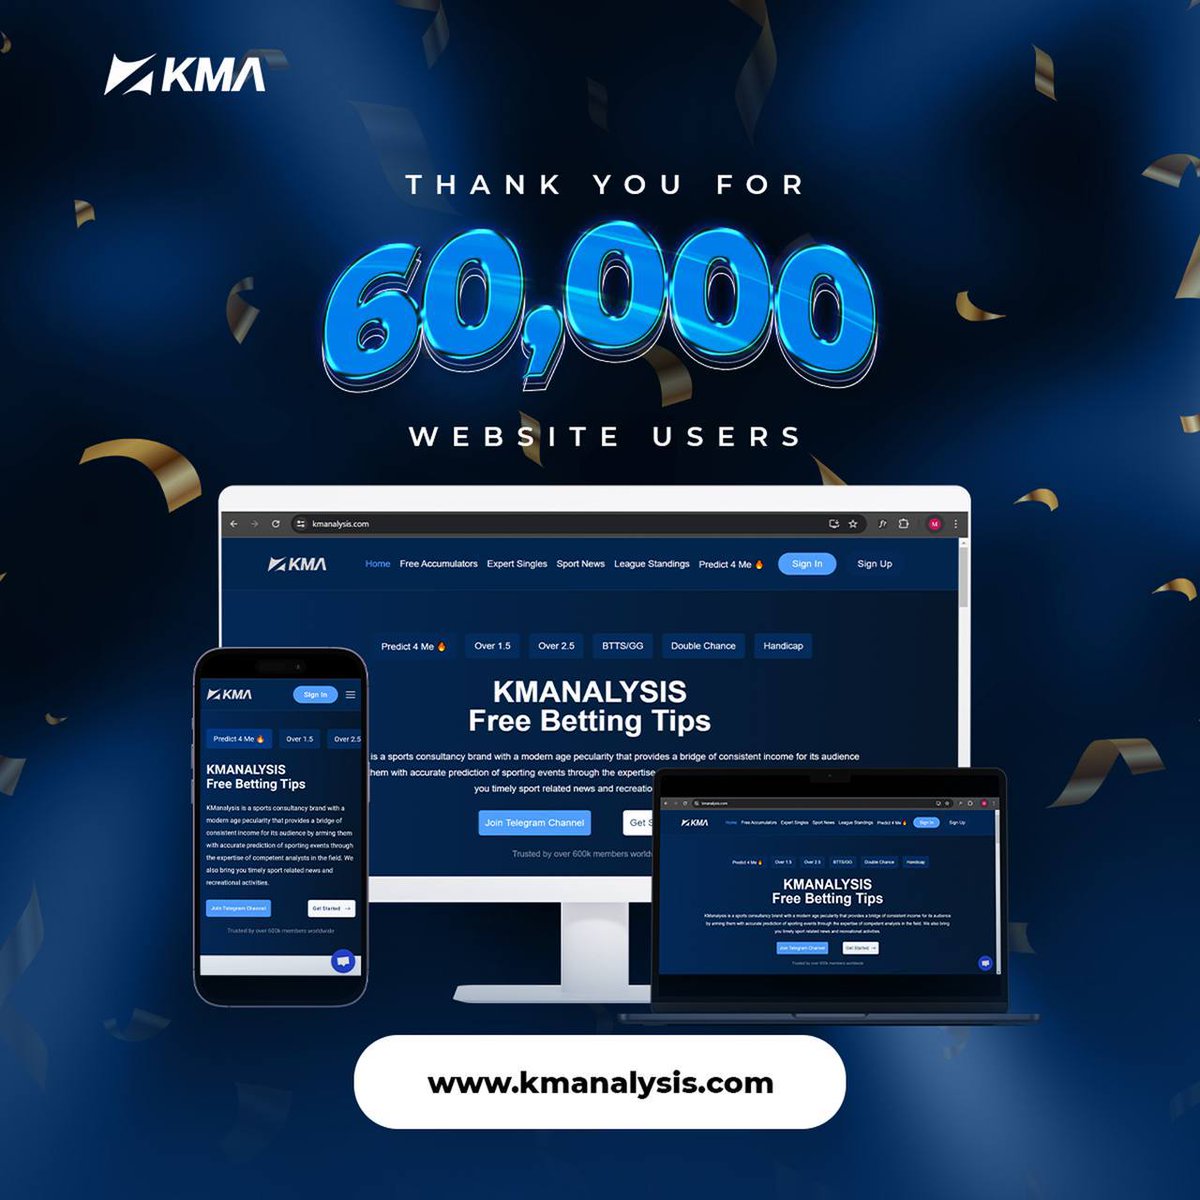 We are thrilled to announce that we have reached a significant milestone - 60,000 users on KMAnalysis.com! 🚀🌟

Thanks to the incredible support and enthusiasm from our growing community, we have achieved this impressive feat, and we couldn't have done it without YOU!